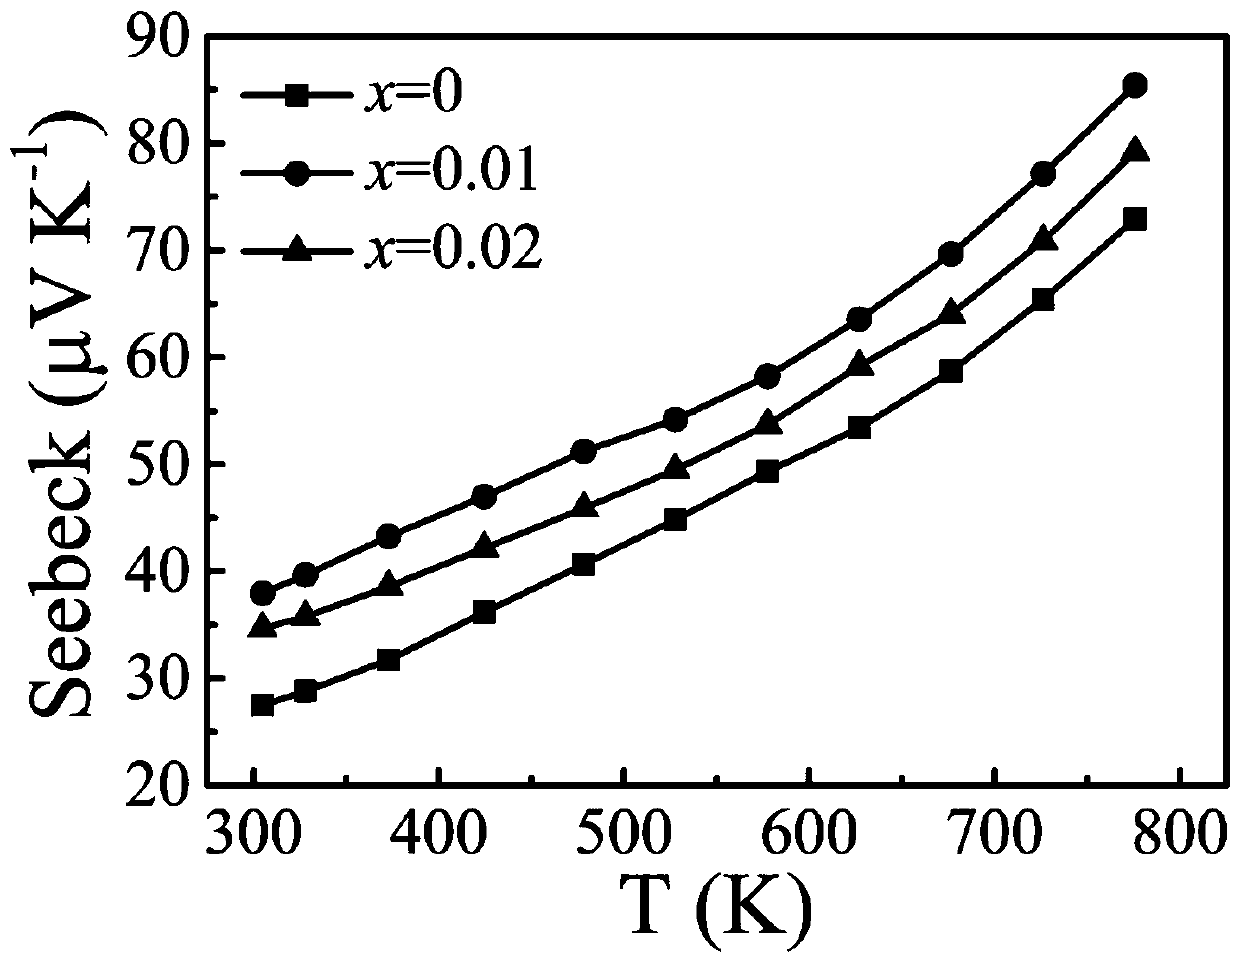 A method to enhance the thermoelectric performance of snte by zn doping